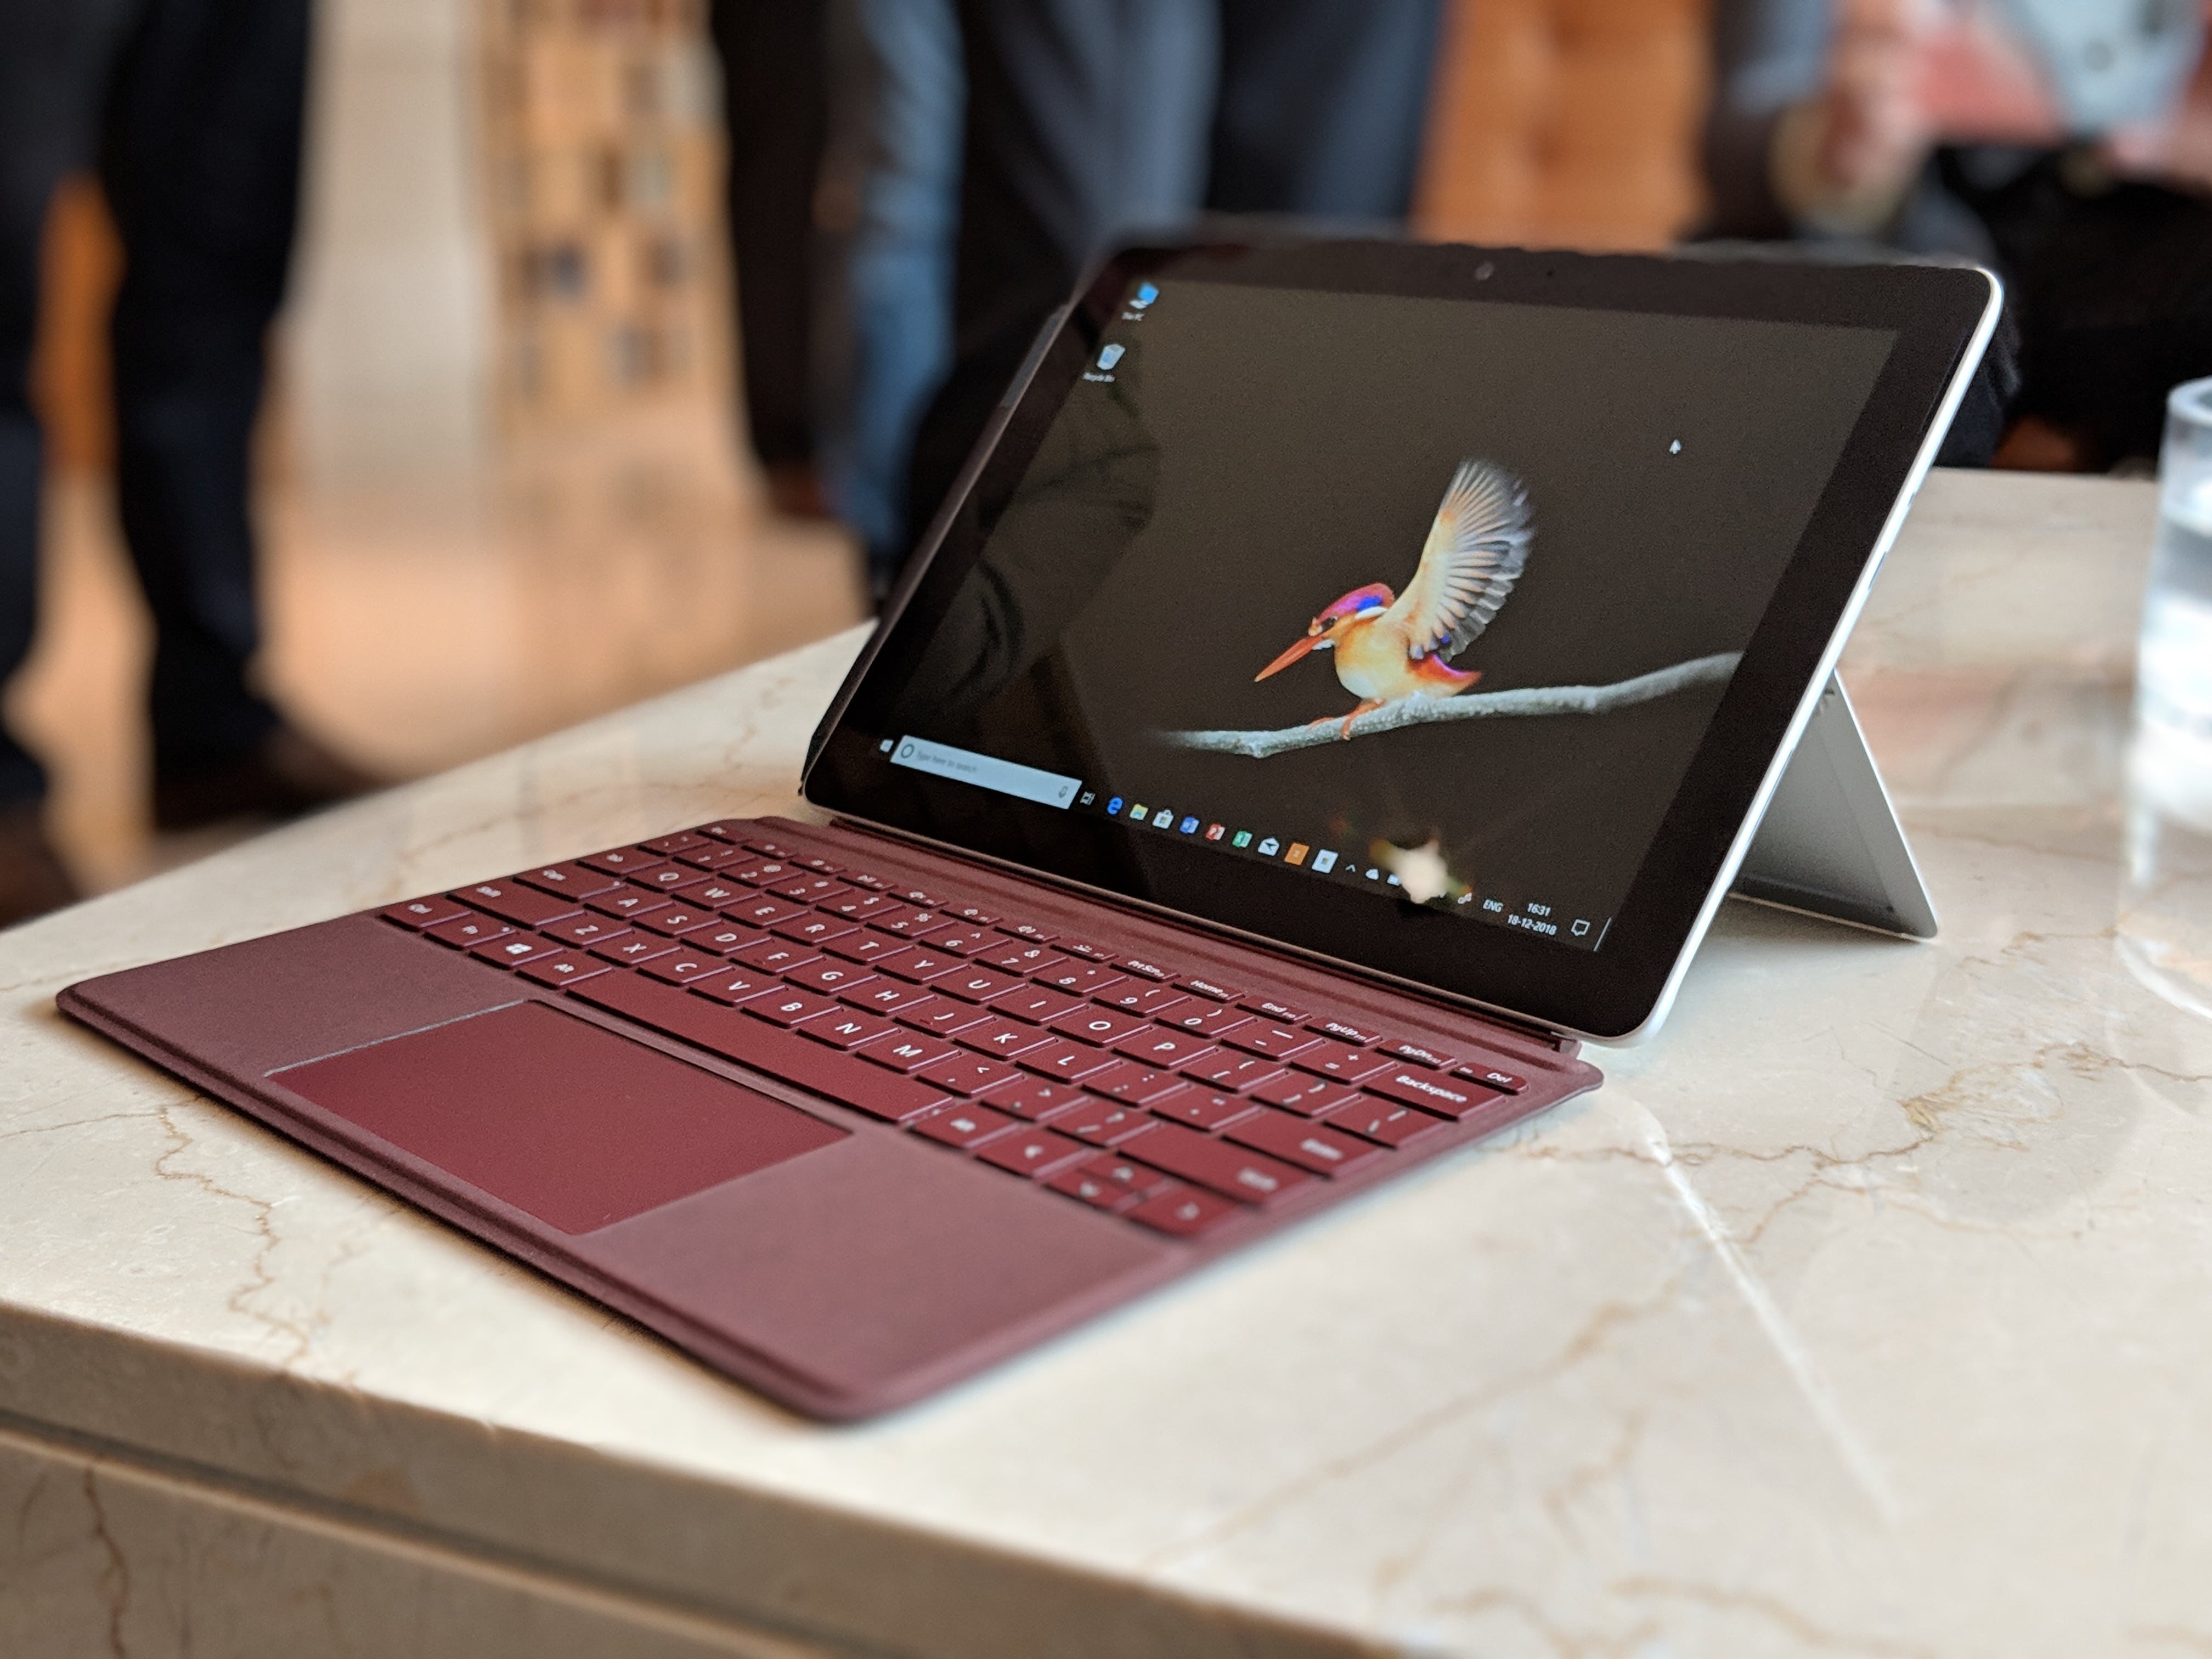 Microsoft Surface Go 2-in-1 with 10-inch display launched in India